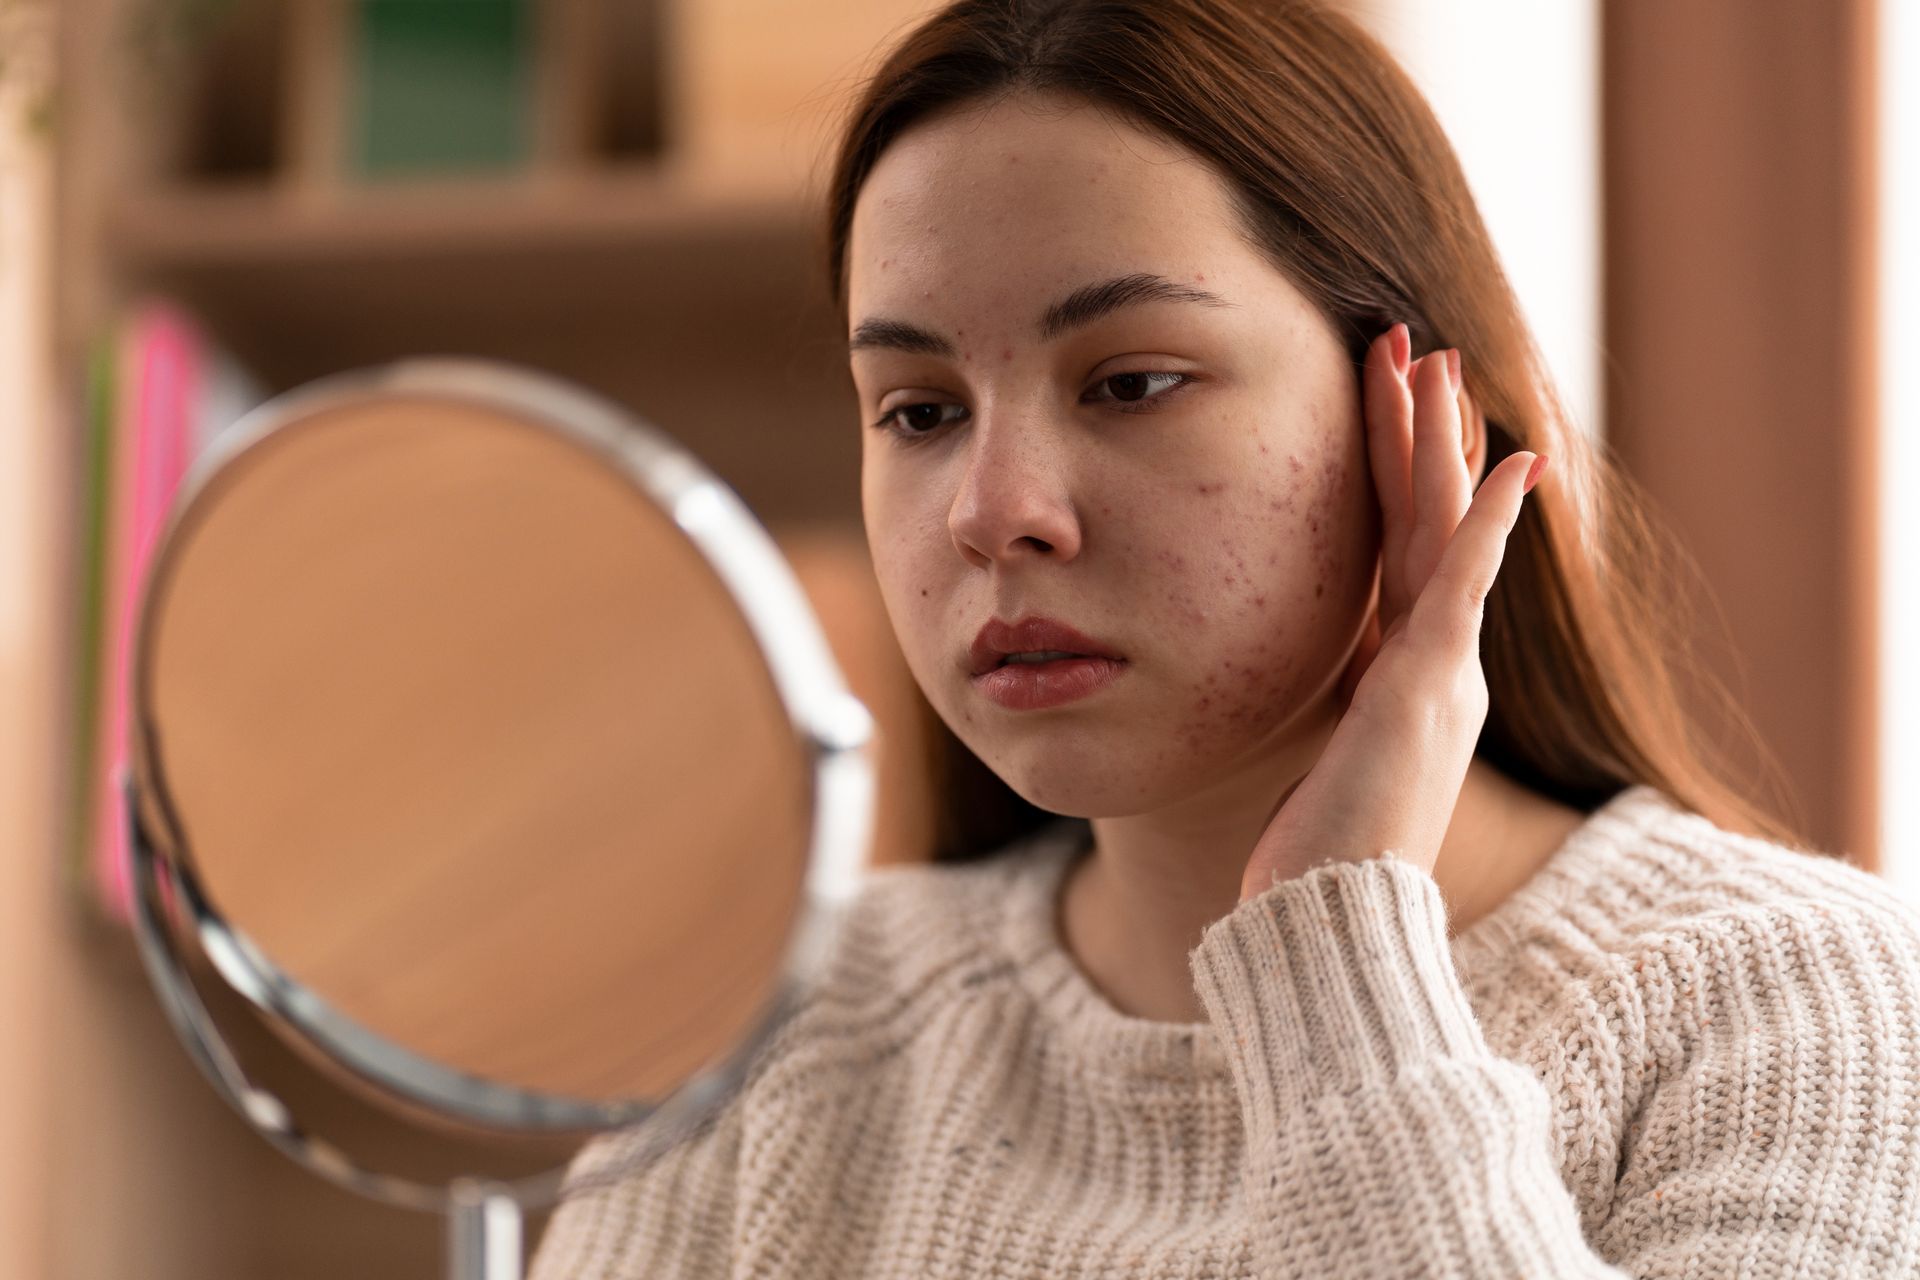 a woman with acne on her face looks at herself in a mirror